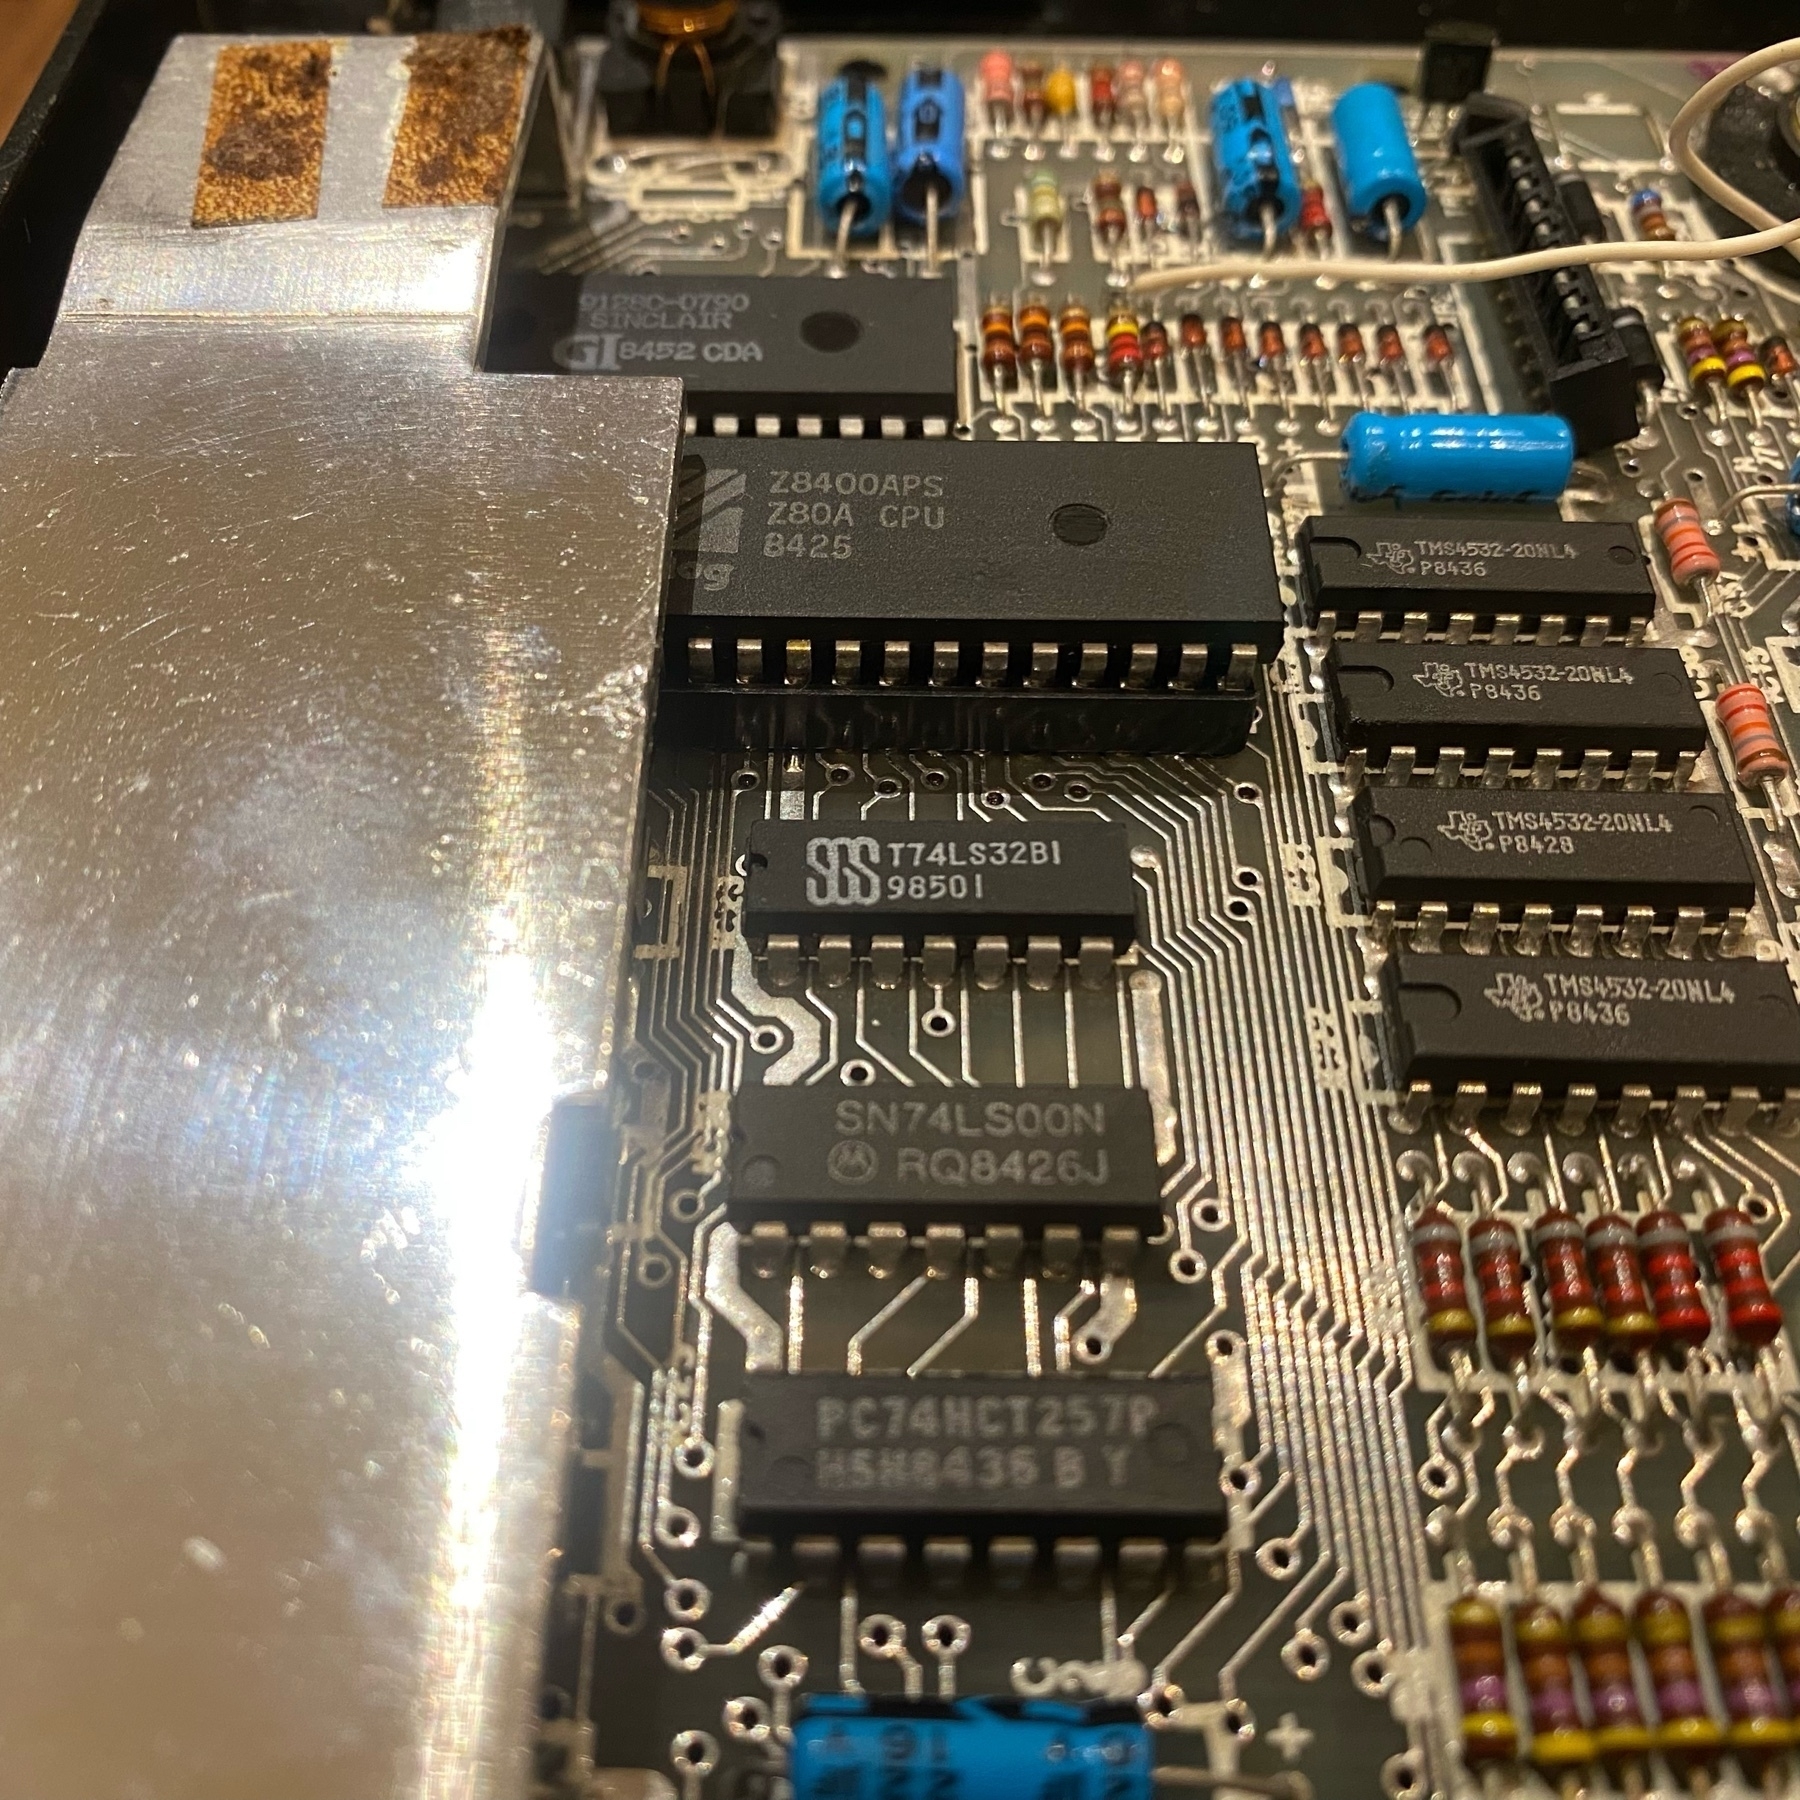 ZX Spectrum circuit board with a very shiny heat-sink and a Z80A CPU with the date code of 8425